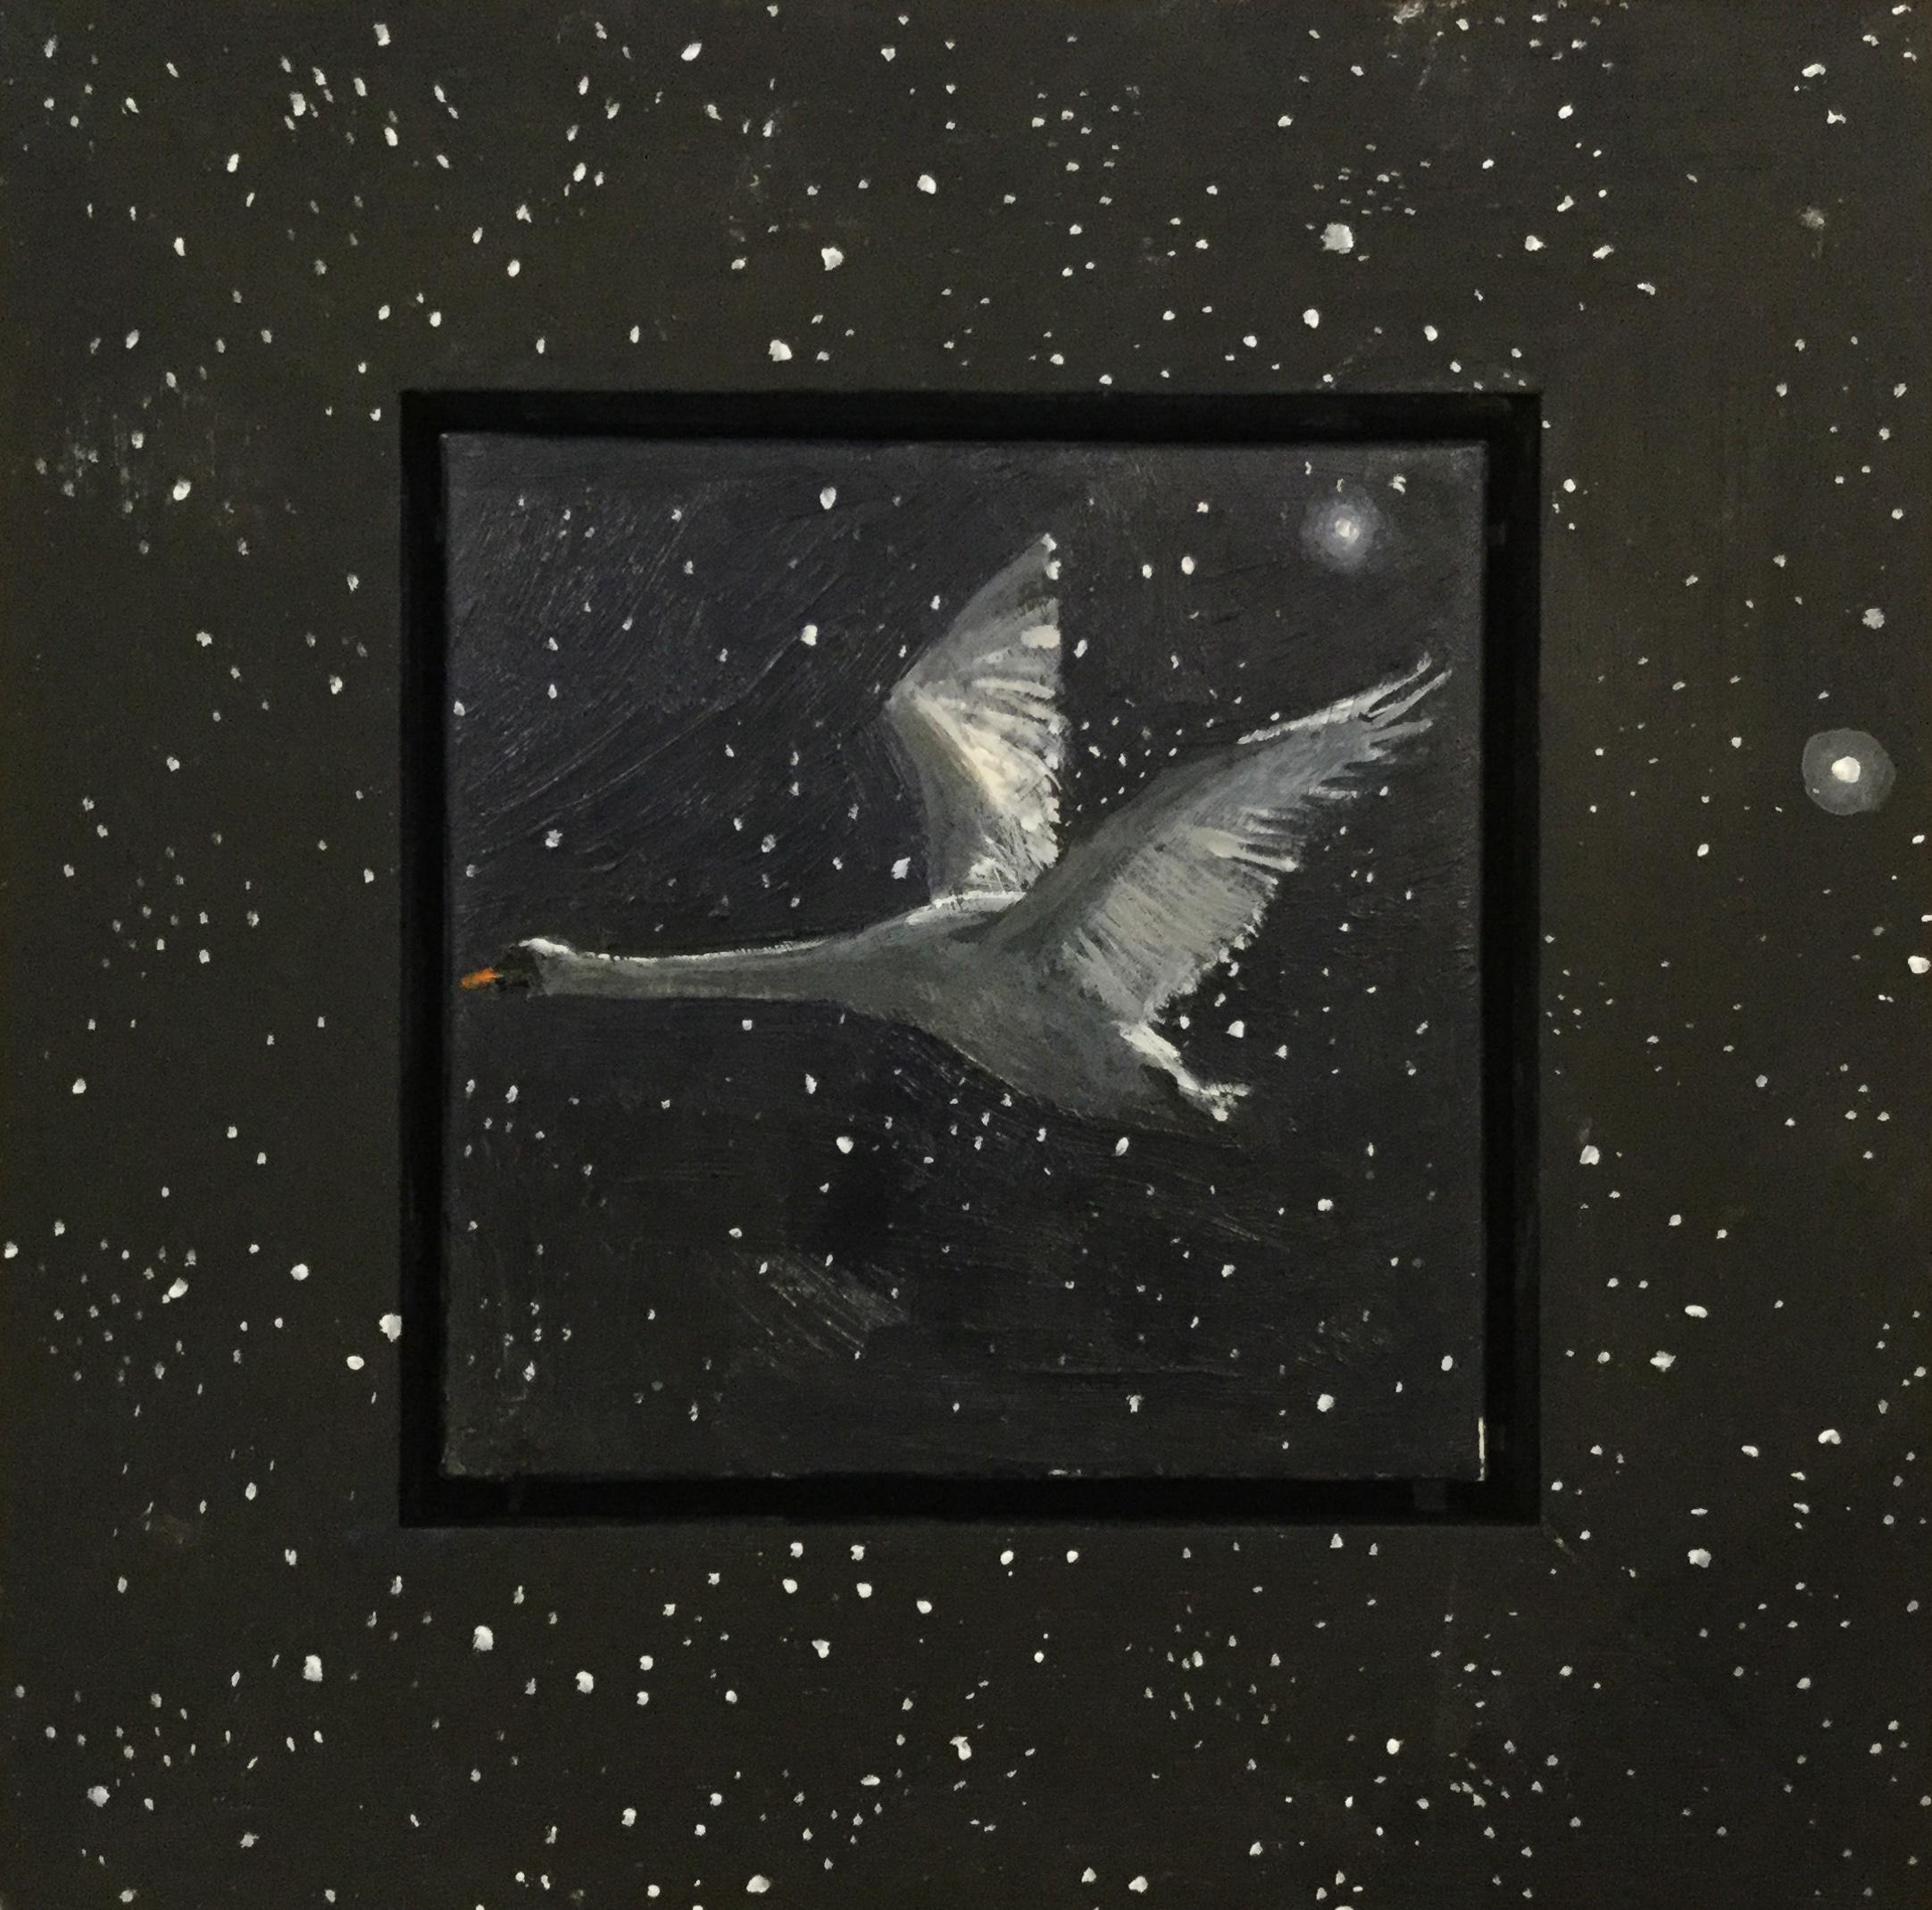 Julie Fleming-Williams Animal Painting - Swan by starlight